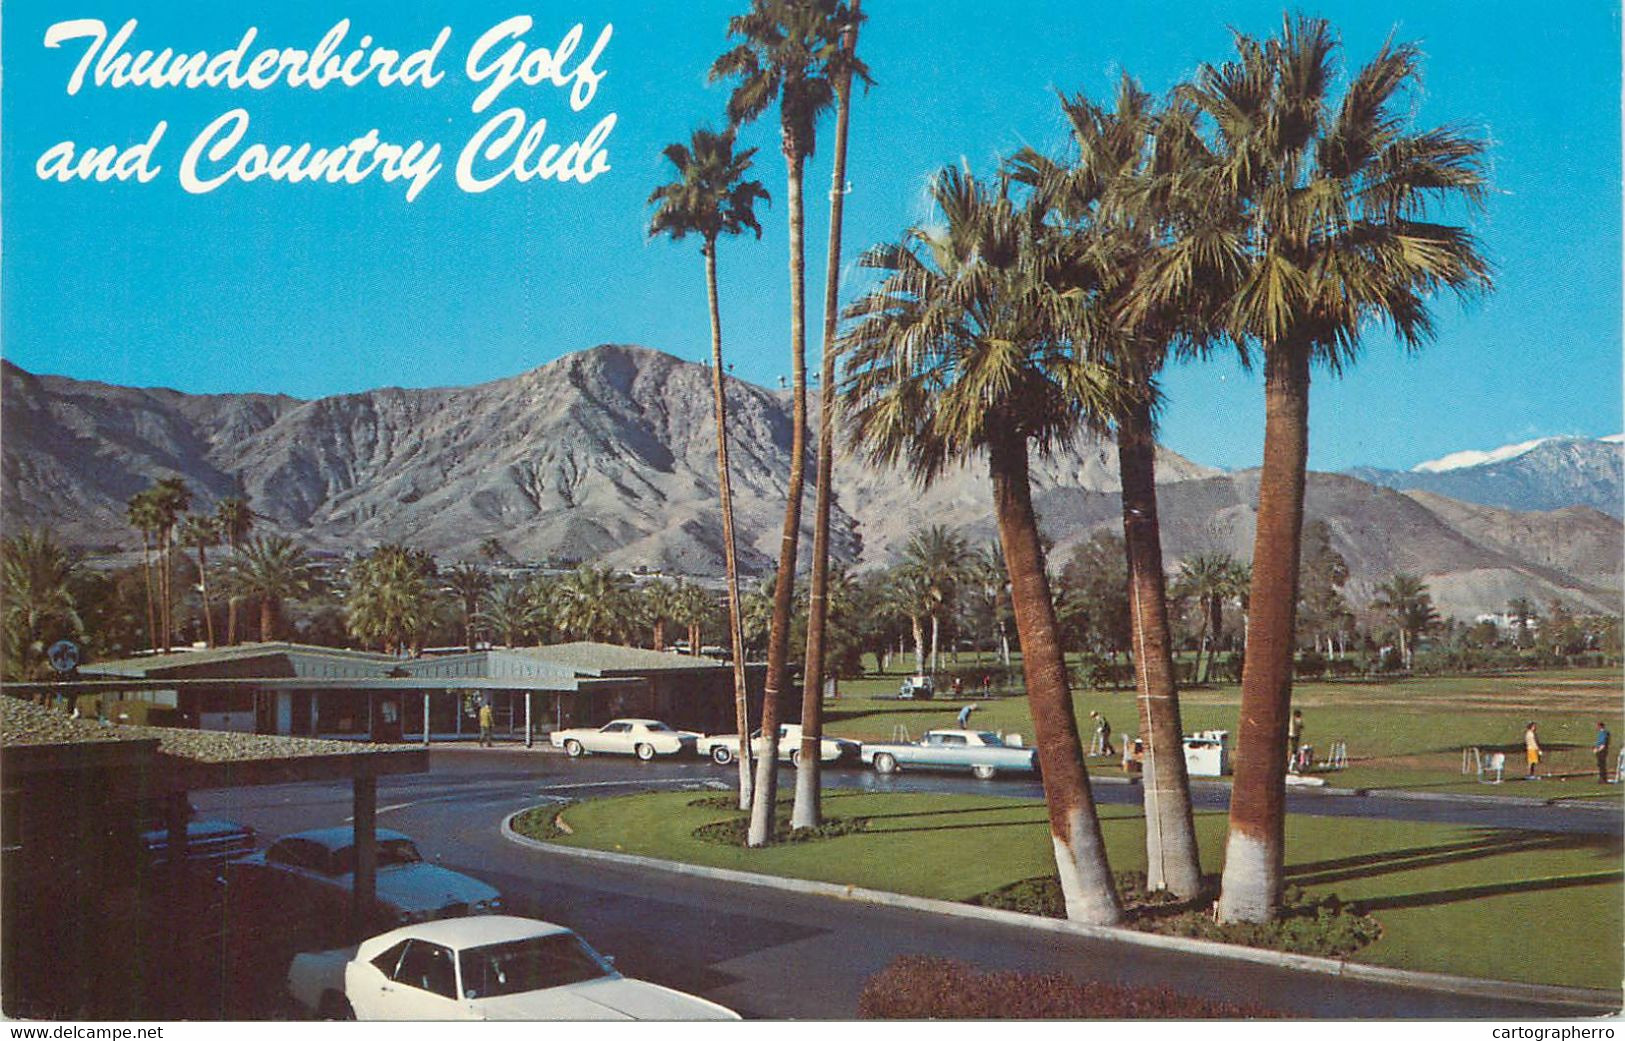 Thunderbird Golf And Country Club Palm Springs California United States - Palm Springs